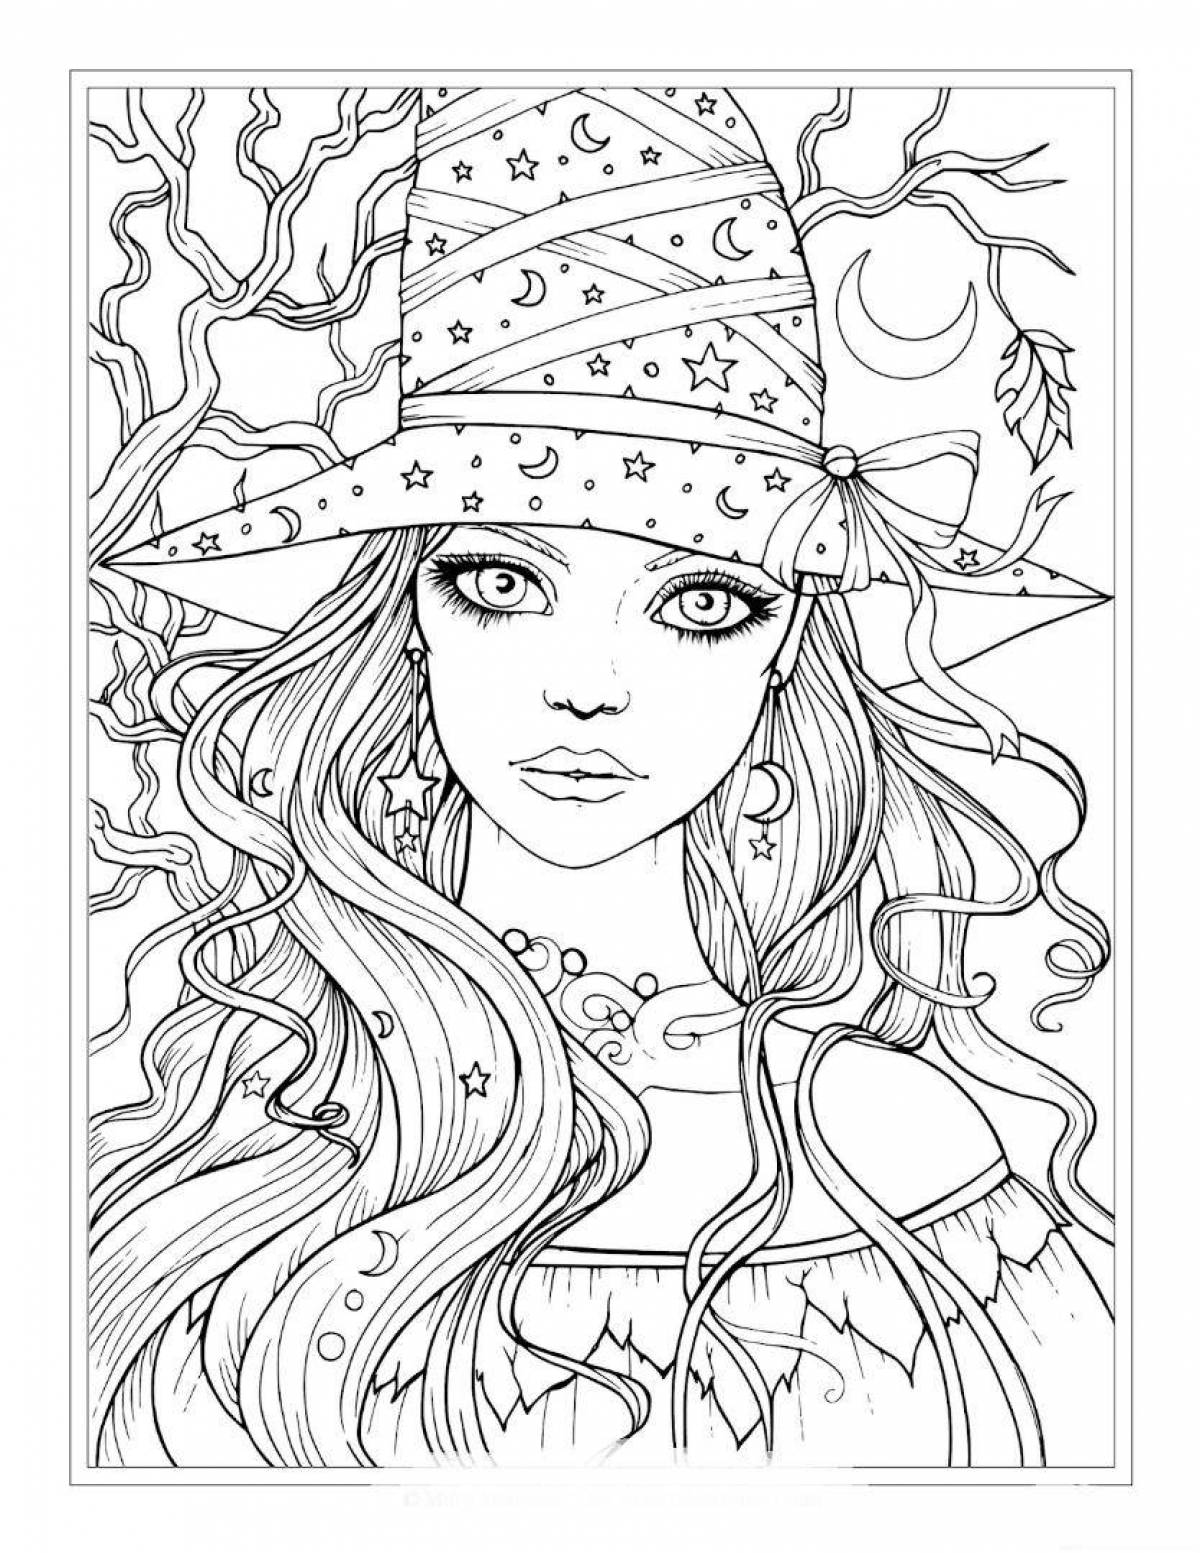 A fascinating coloring book for girls aged 14